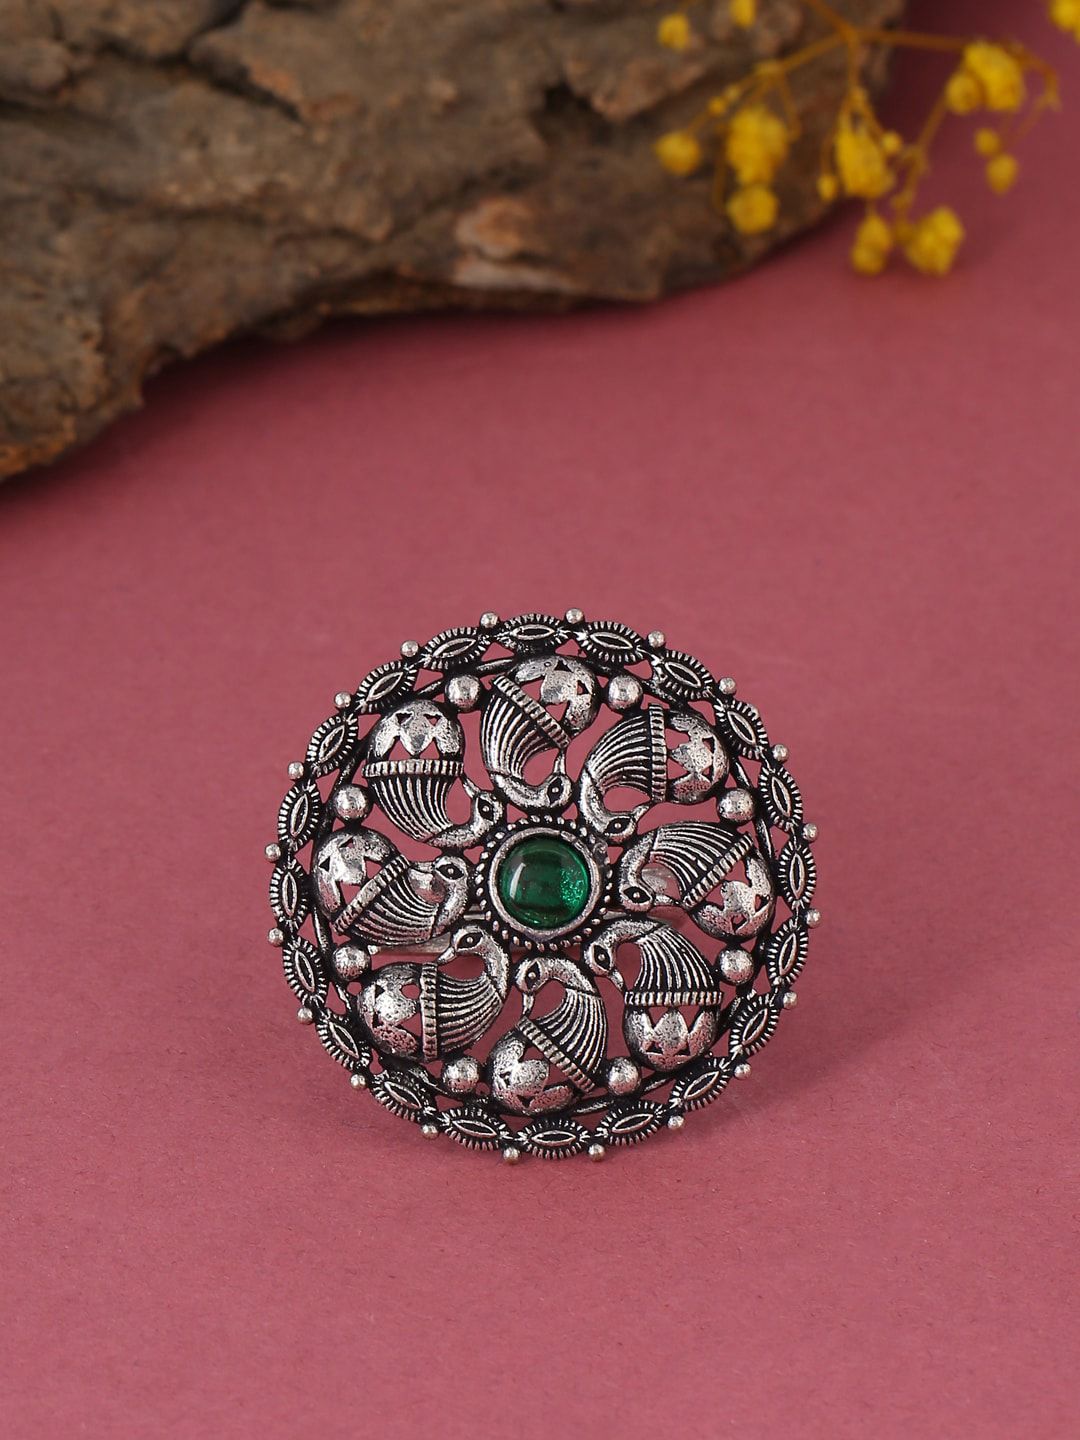 kashwini Silver-Plated & Green Stone-Studded Finger Ring Price in India